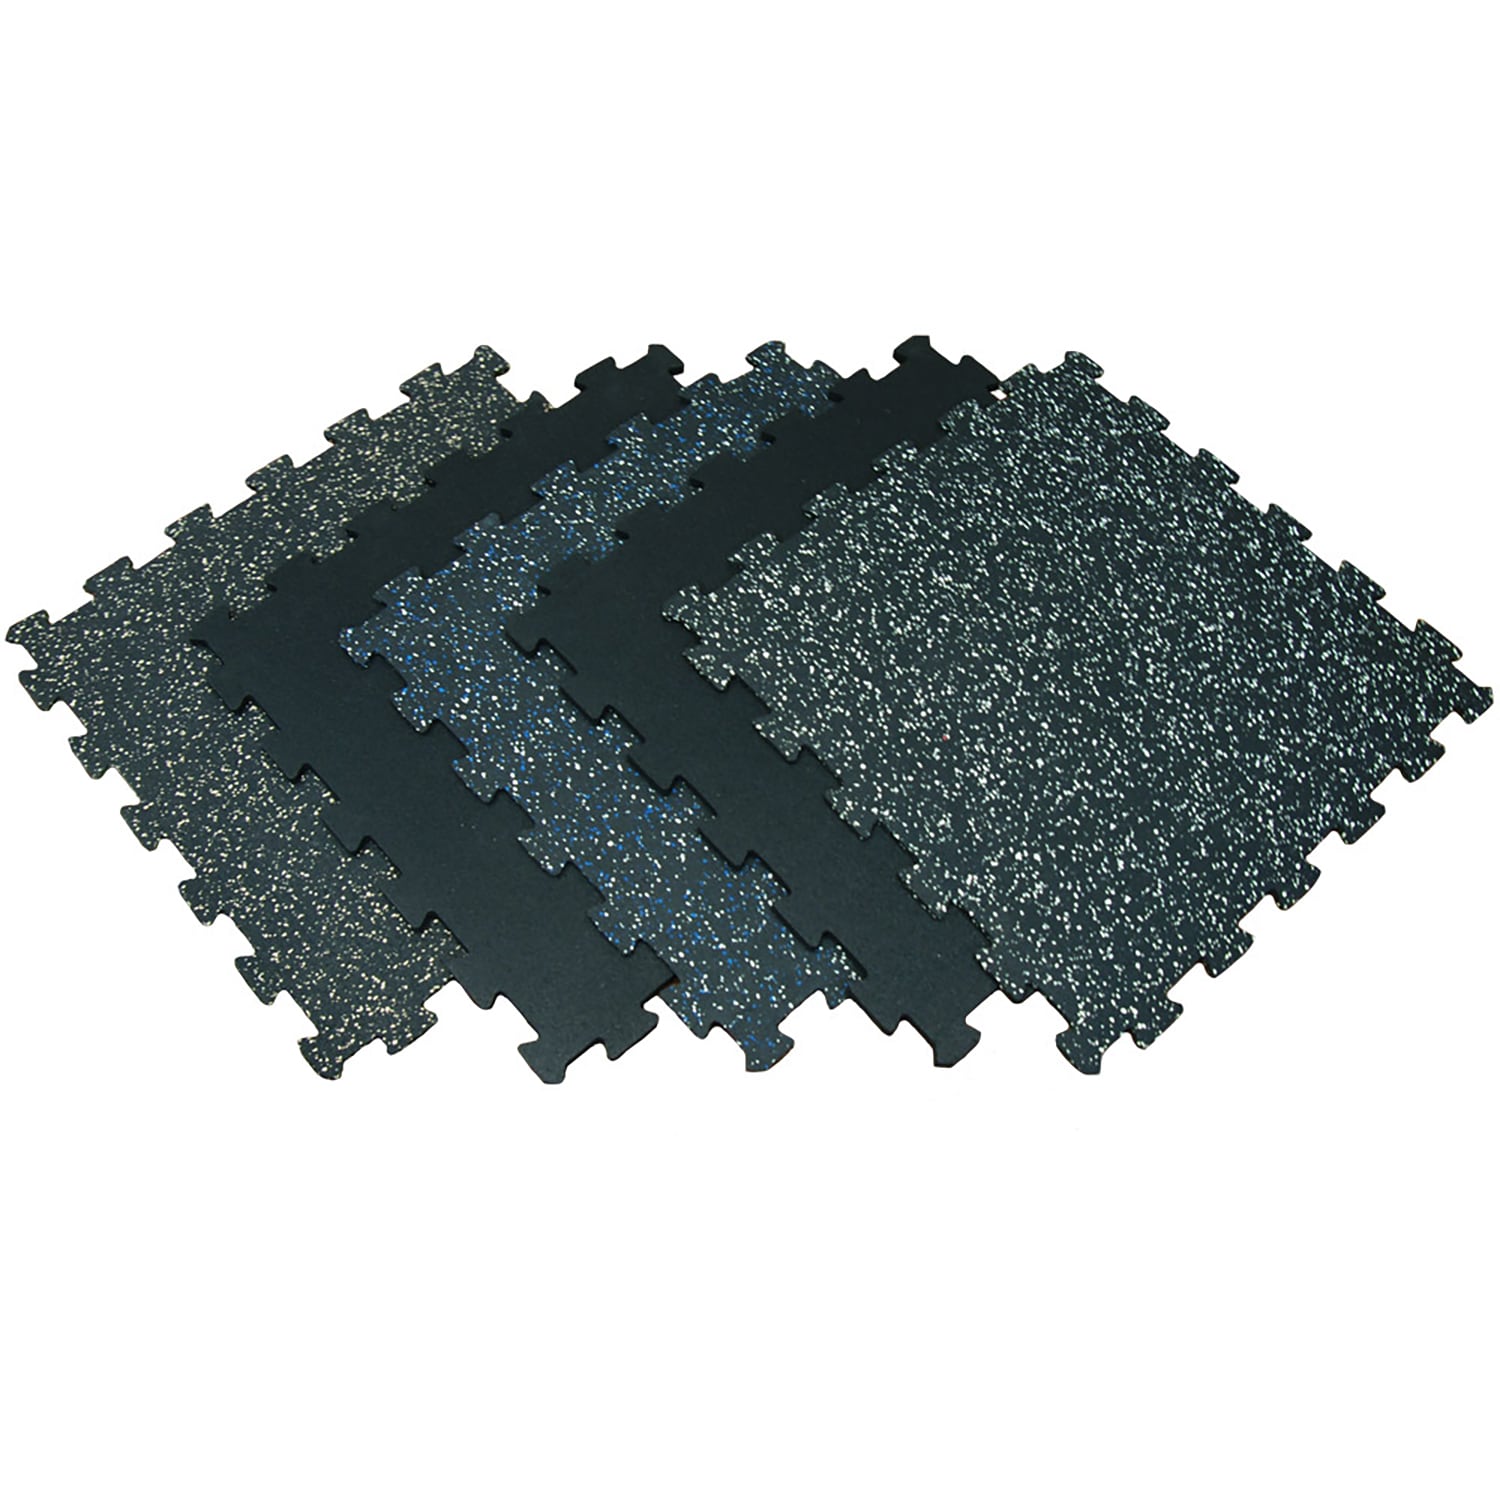 What are the 5 Best 4x6 Rubber Gym Floor Mat Sizes & Styles